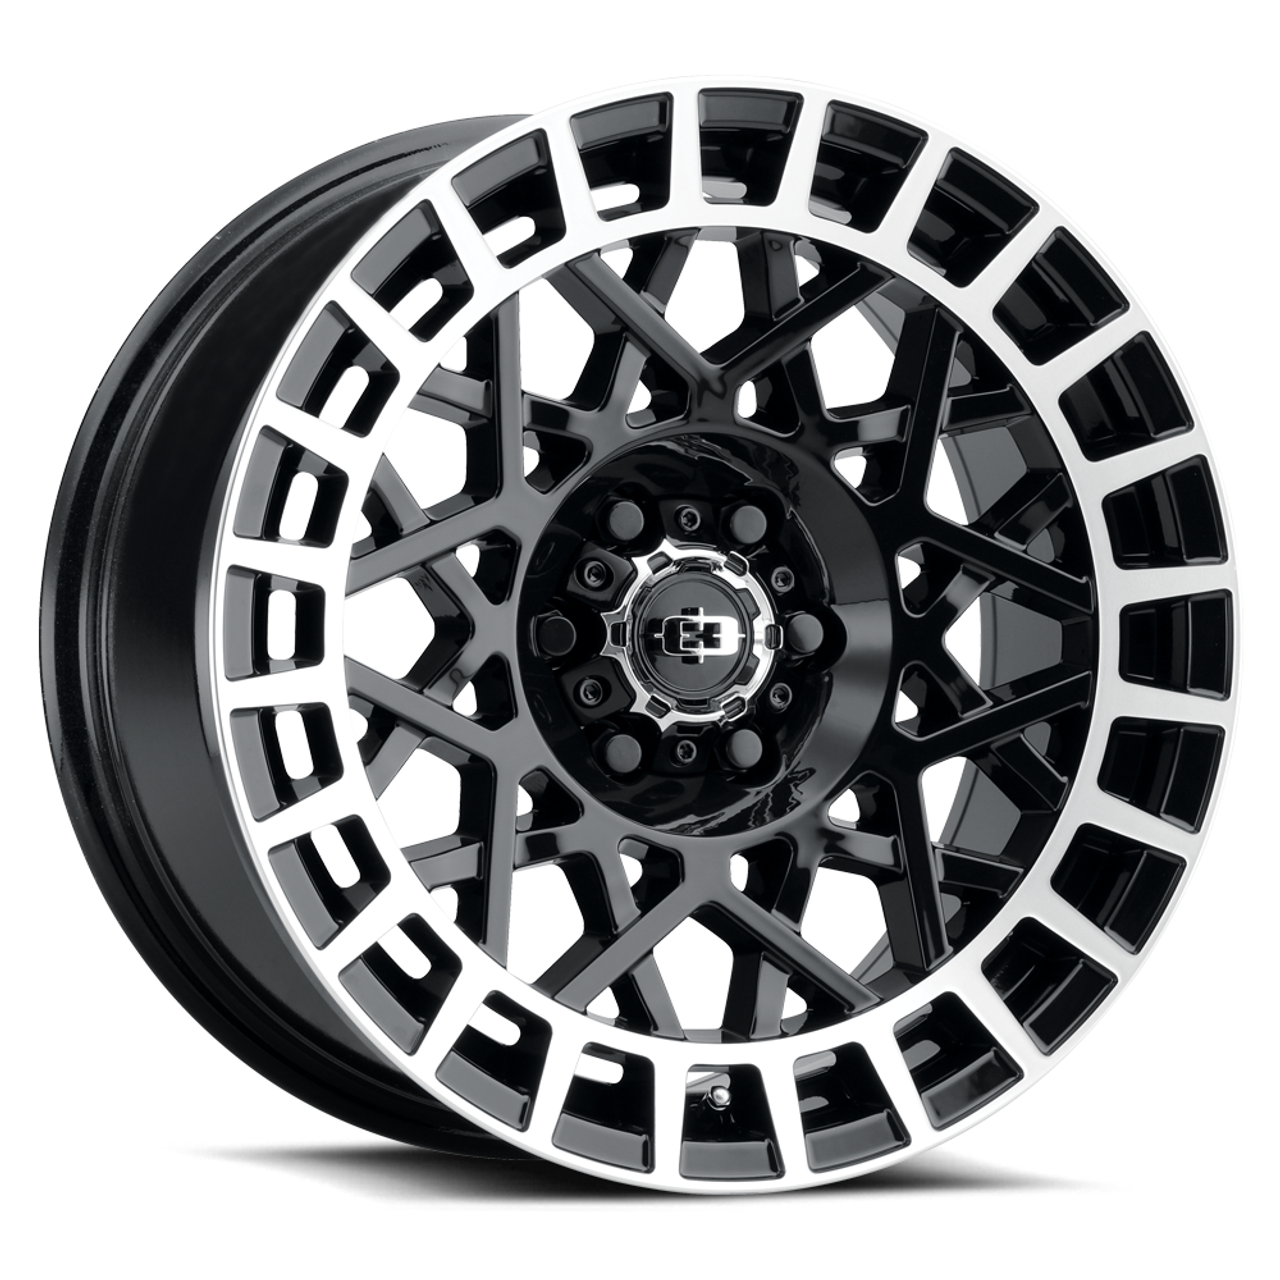 18" Vision 349 Savage Gloss Black Machined Lip 6x135 Wheel 12mm For Ford Lincoln